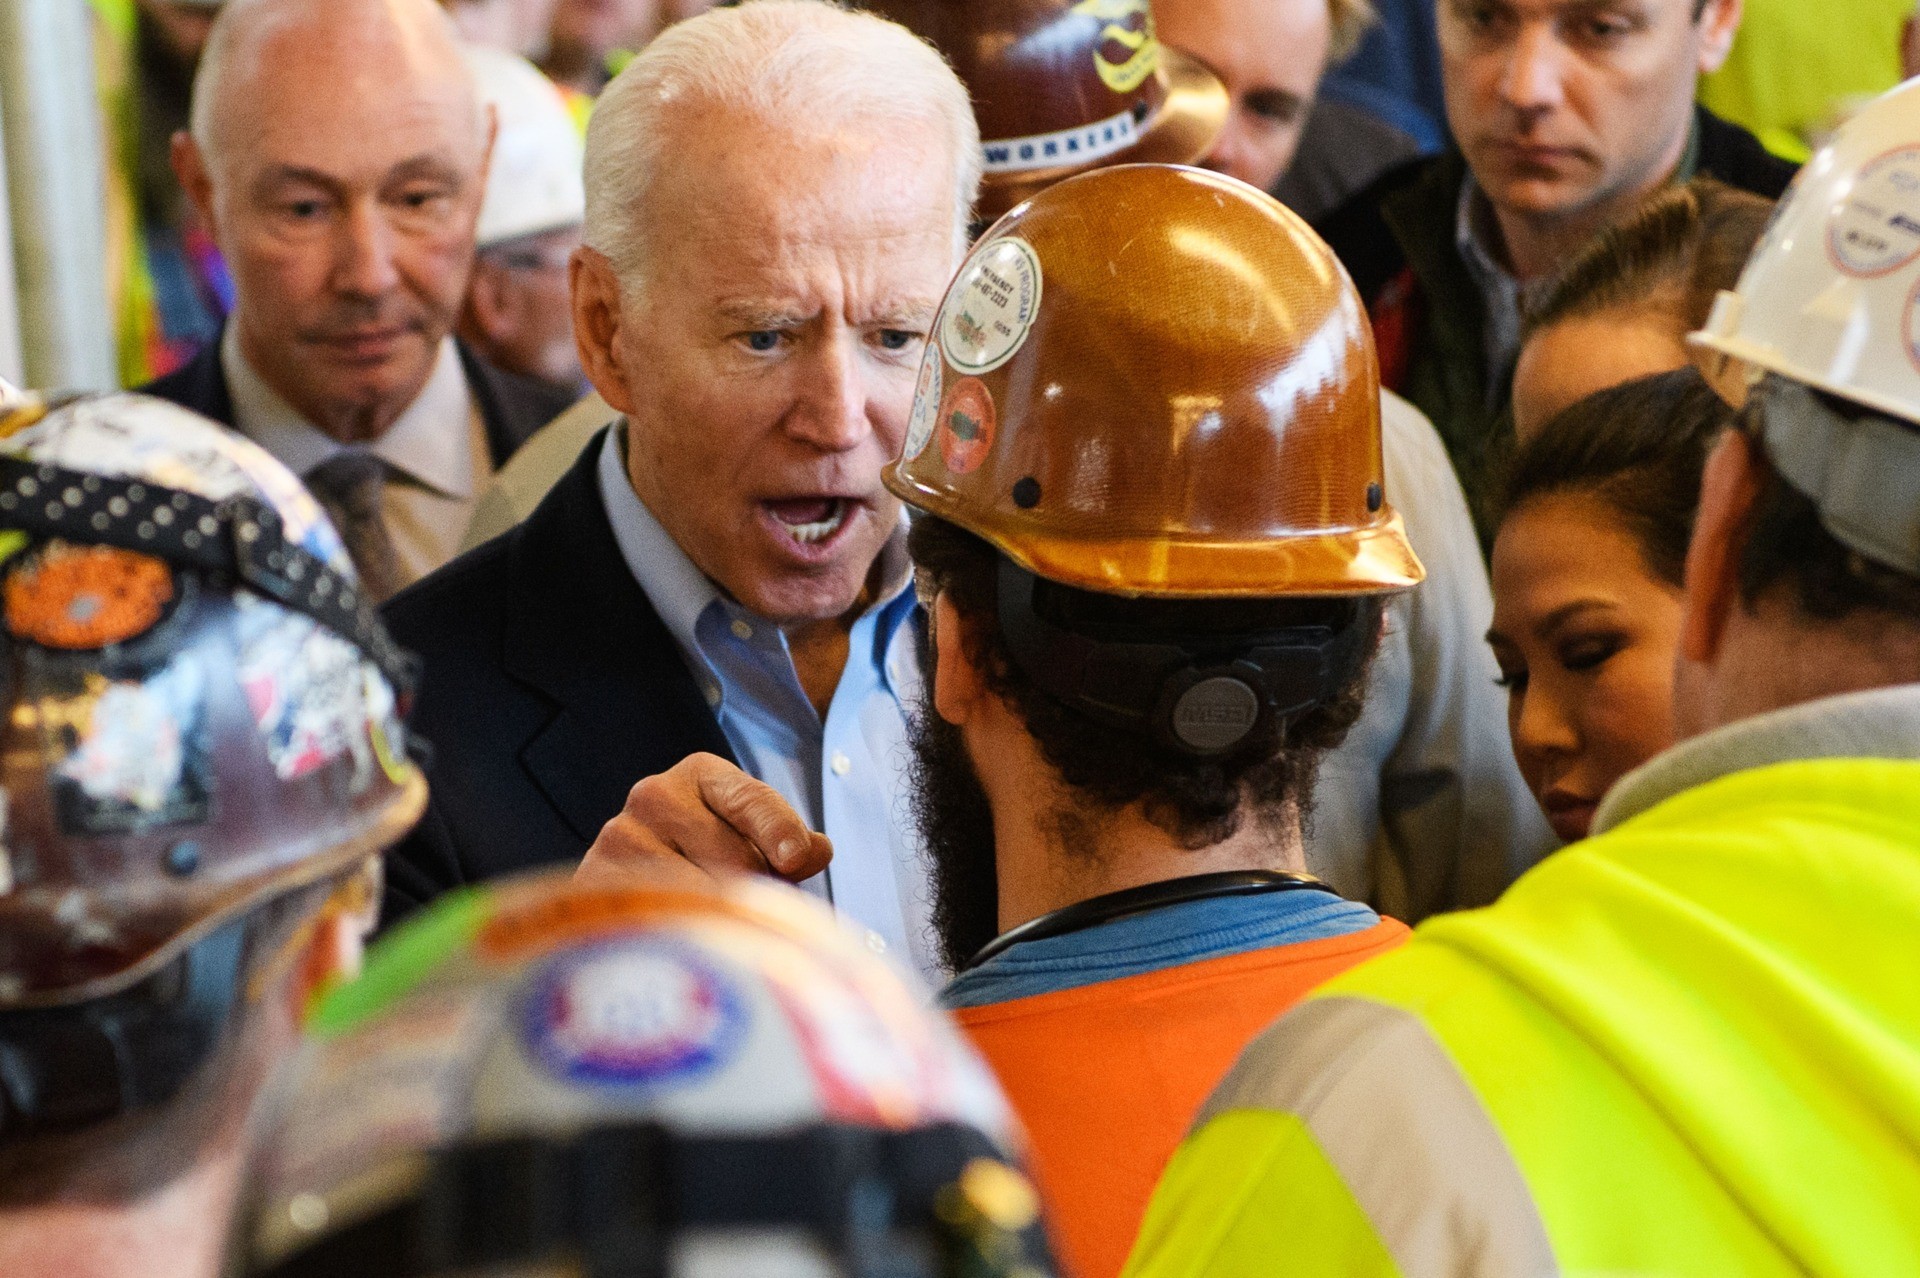 TOPSHOT - Democratic presidential candidate Joe Biden has heated exchange meets workers and discusses gun rights as he tours the Fiat Chrysler plant in Detroit, Michigan on March 10, 2020. - Biden opened primary day meeting workers at an under-construction automobile plant in Detroit, where he received cheers but also was confronted by one worker. In an exchange avidly shared online by Trump supporters, the worker, wearing a construction helmet and reflective vest, accused Biden of seeking to weaken the constitutional right to own firearms. "You